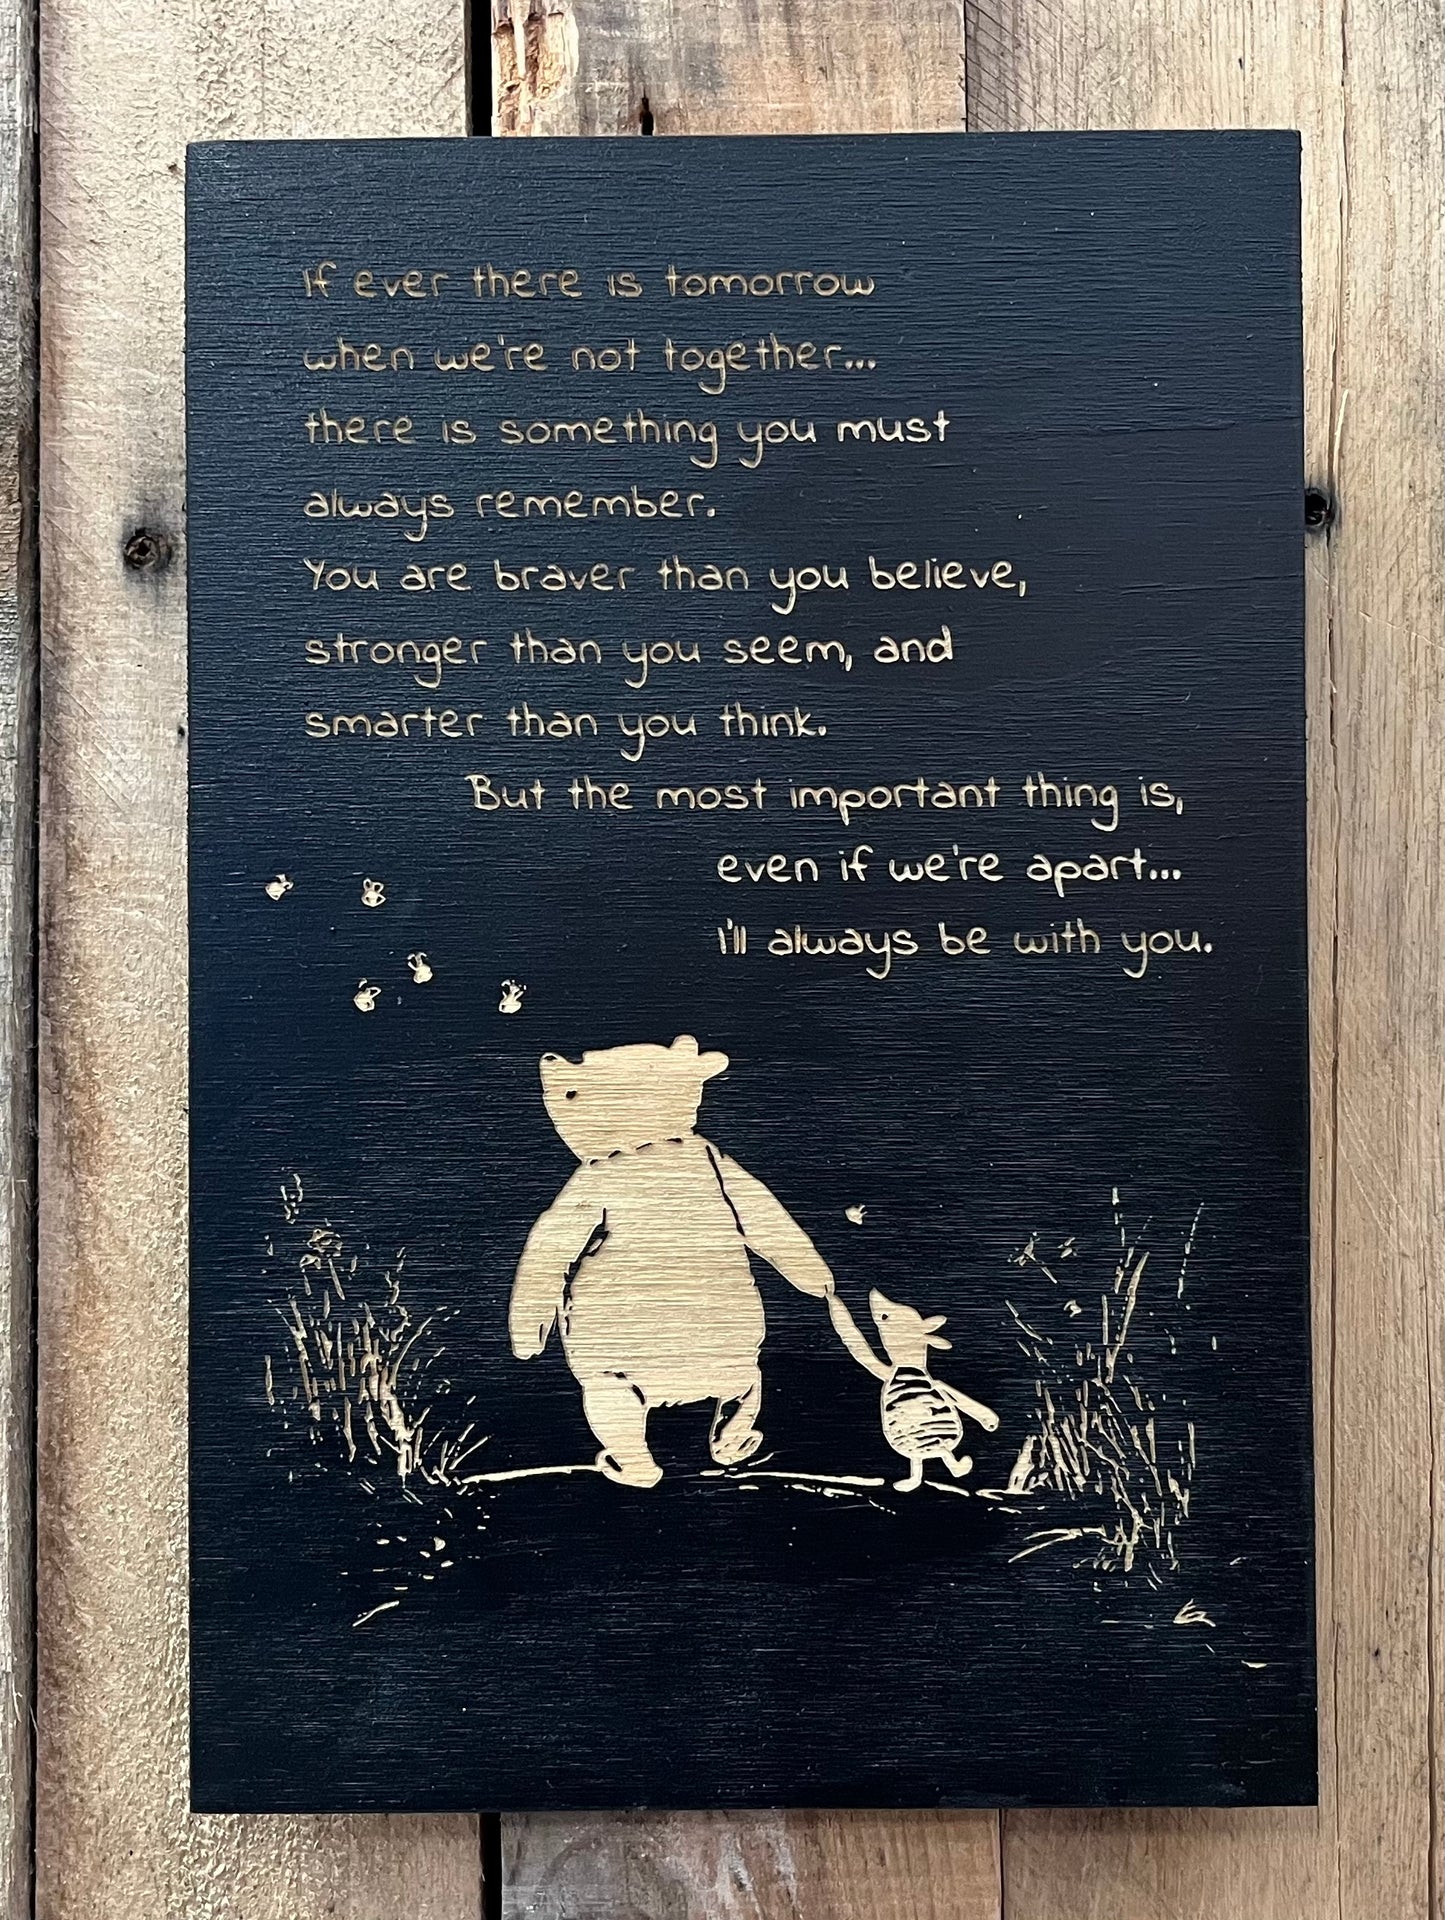 Classic Winnie The Pooh Wood Sign - “if Ever There Is Tomorrow”